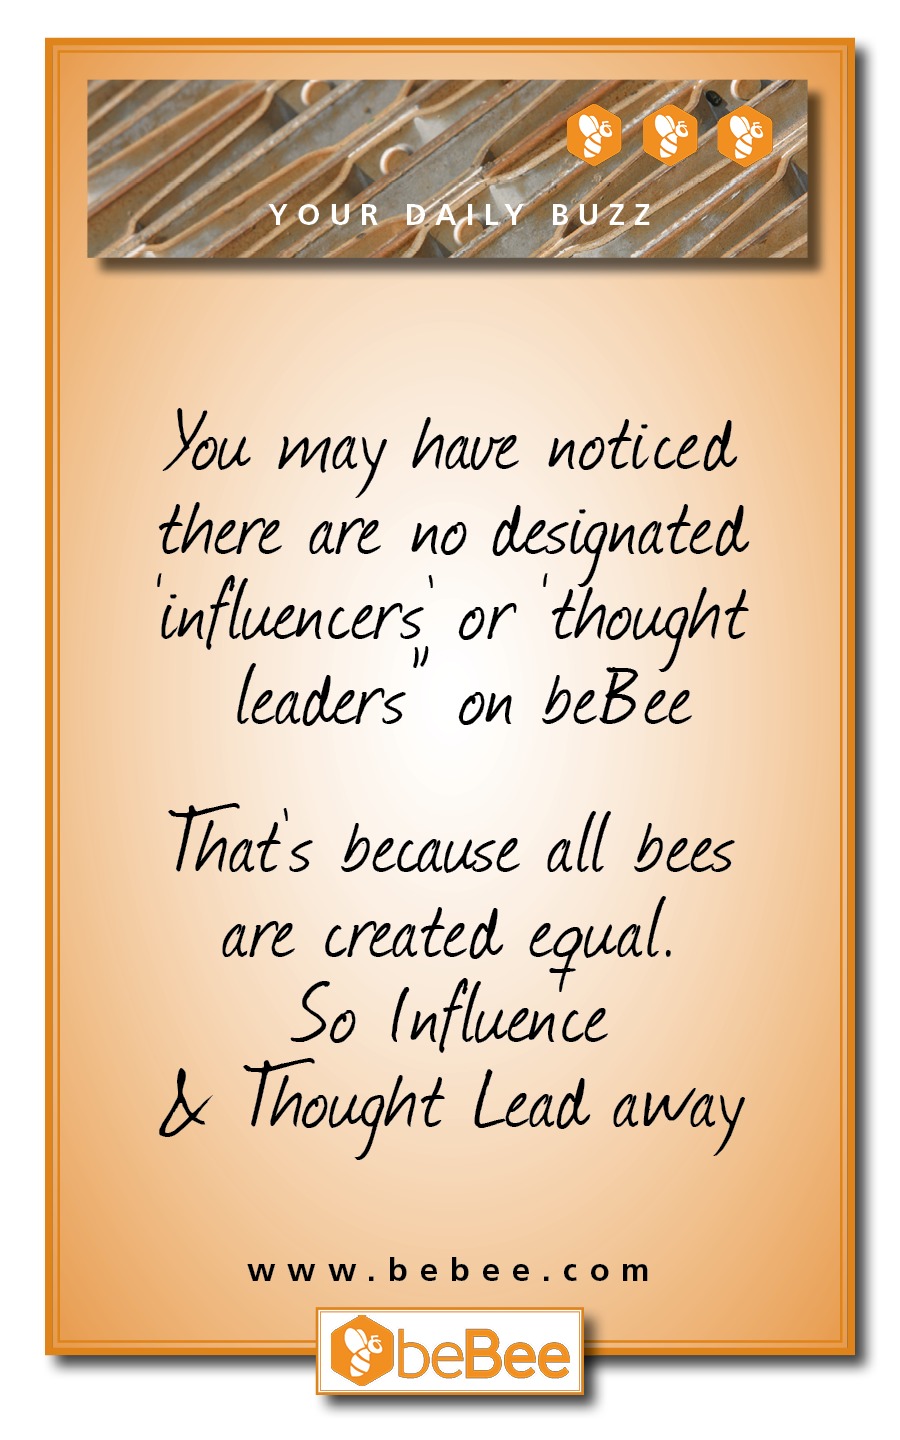 Yow may have noticed

there are no designated

influencers or thought
leaders om beBee

That's because all bees
are created. equal.
So Influence
A Thought Lead away

 

 

www.bebee.com